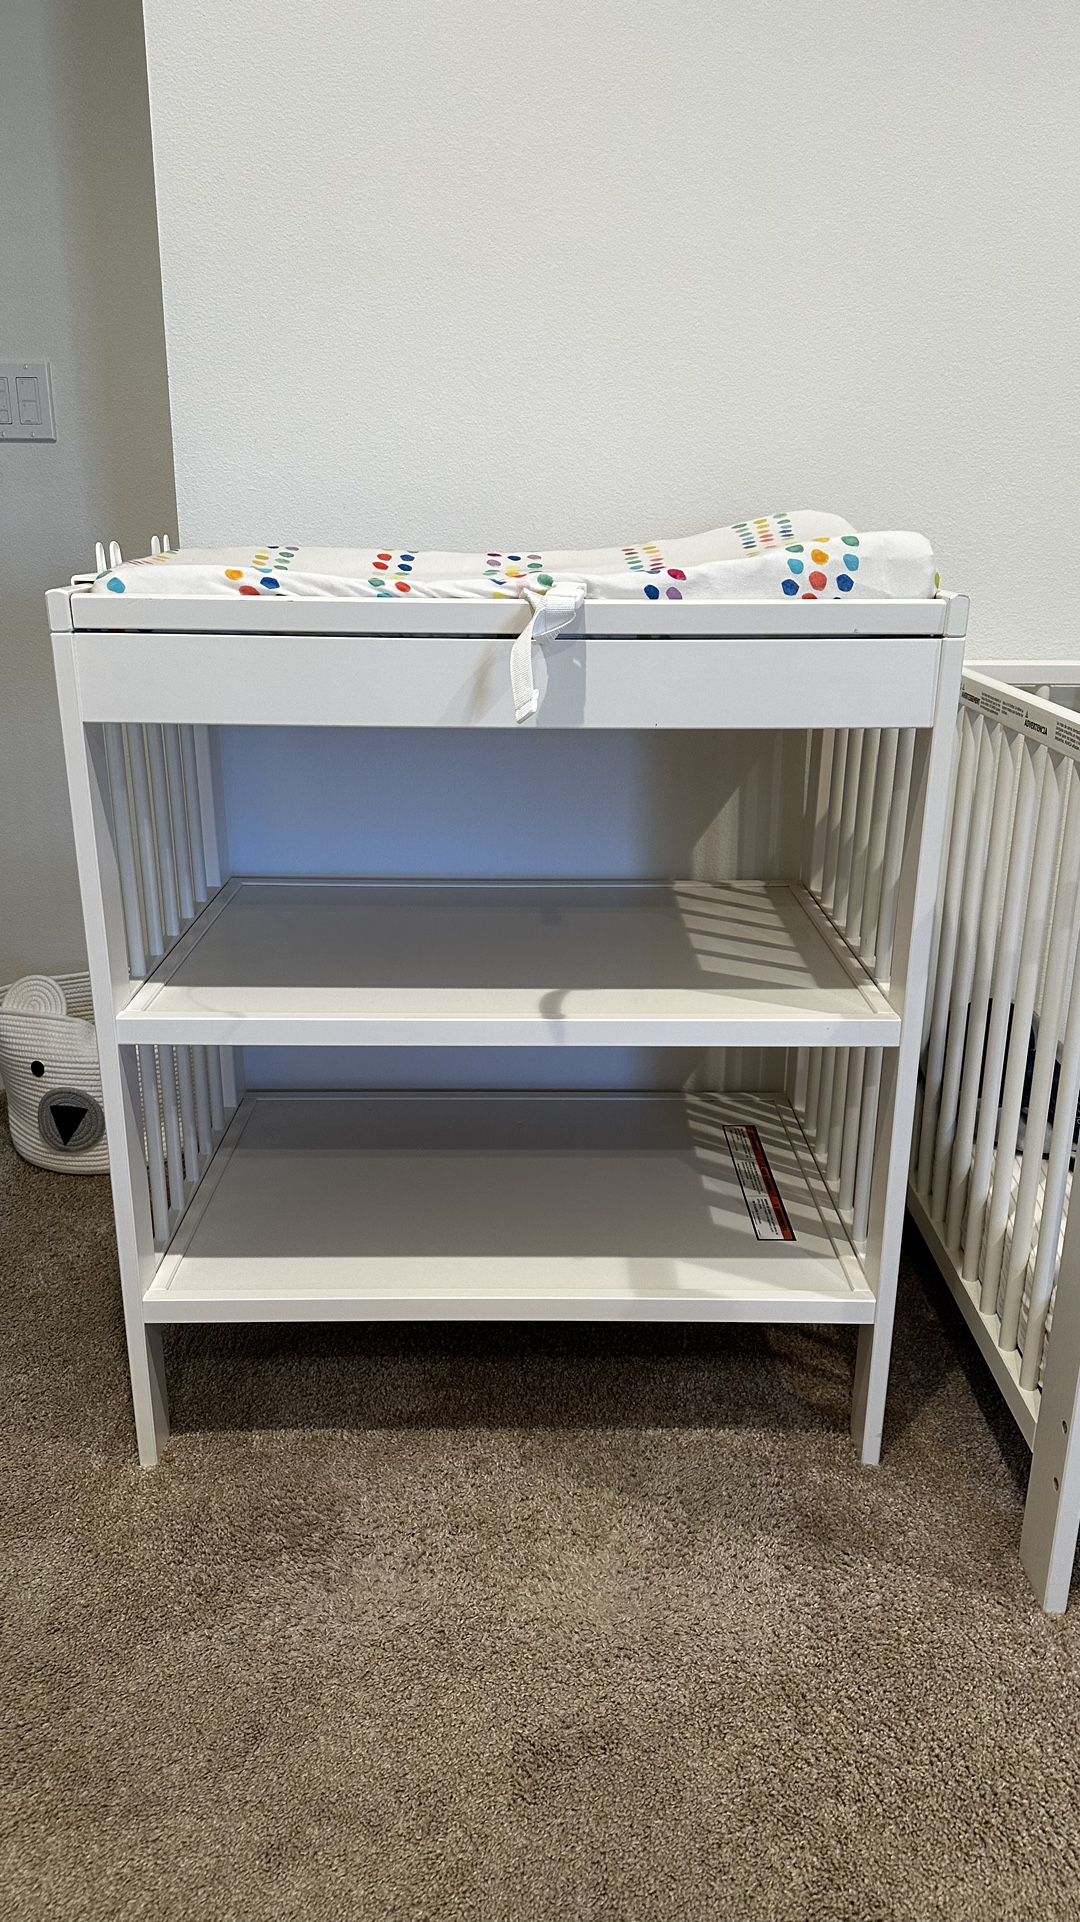 White Wood Changing table and Changing Pad/ Organic Covers